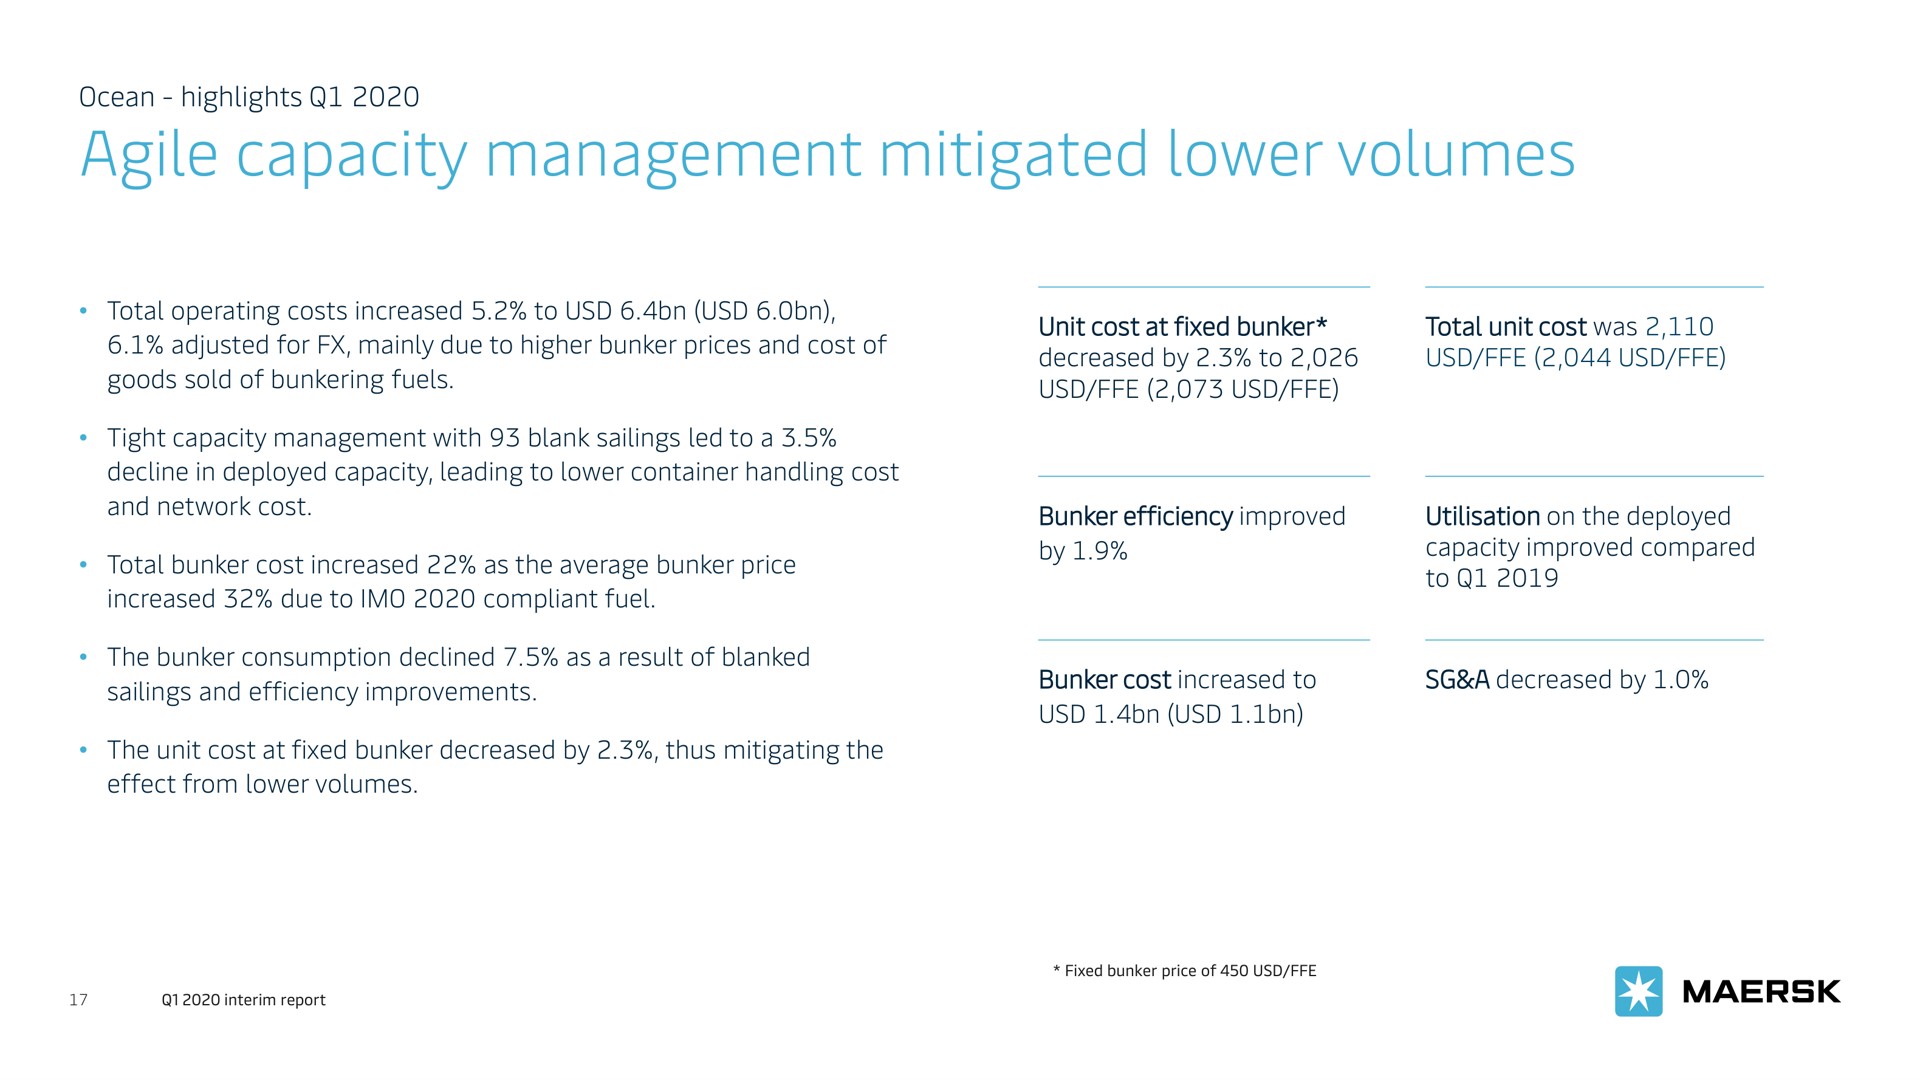 agile capacity management mitigated lower volumes | Maersk